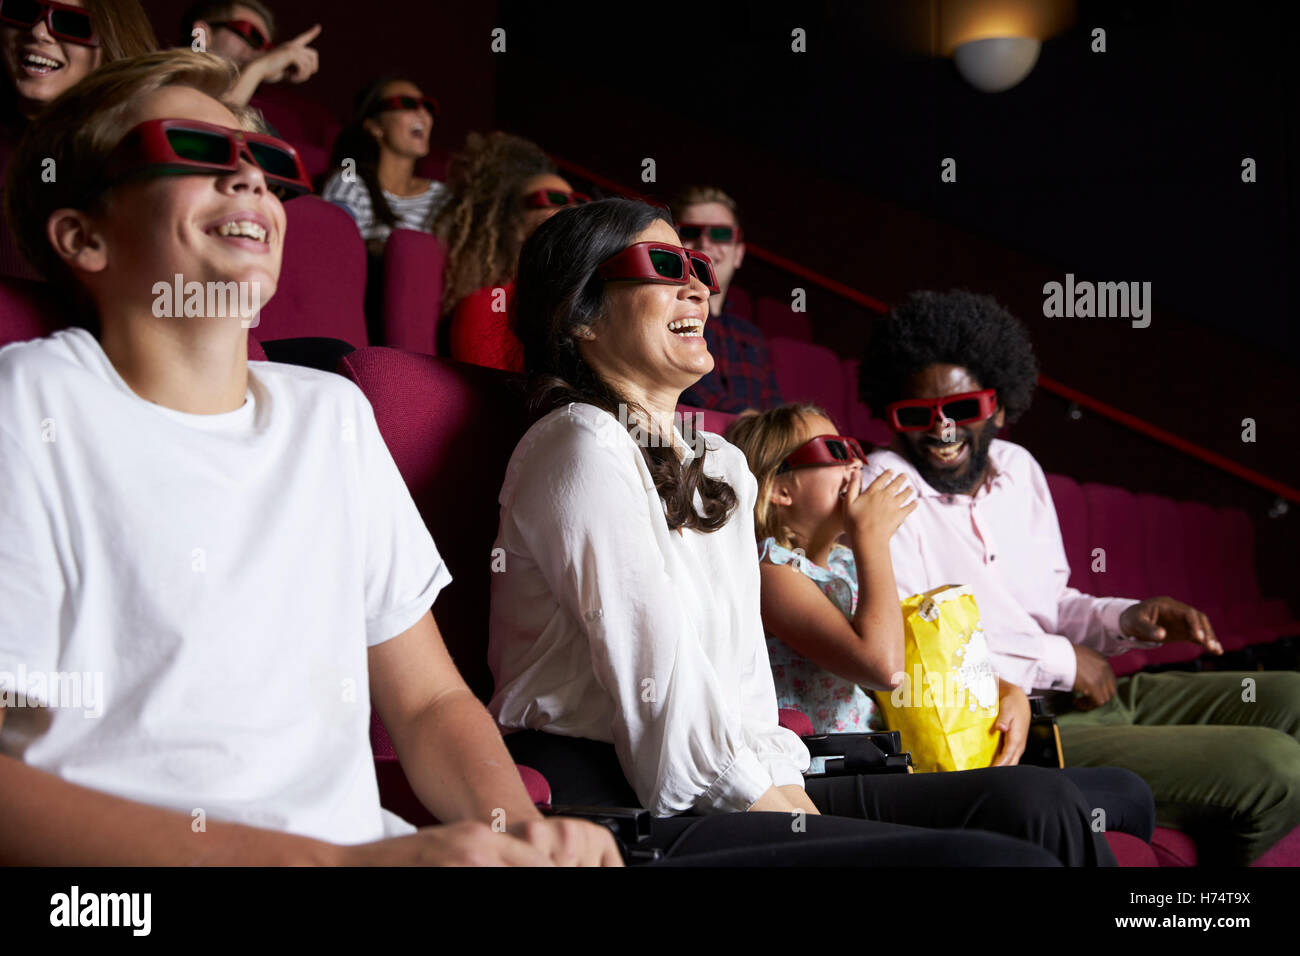 Audience In Cinema Wearing 3D Glasses Watching Comedy Film Stock Photo